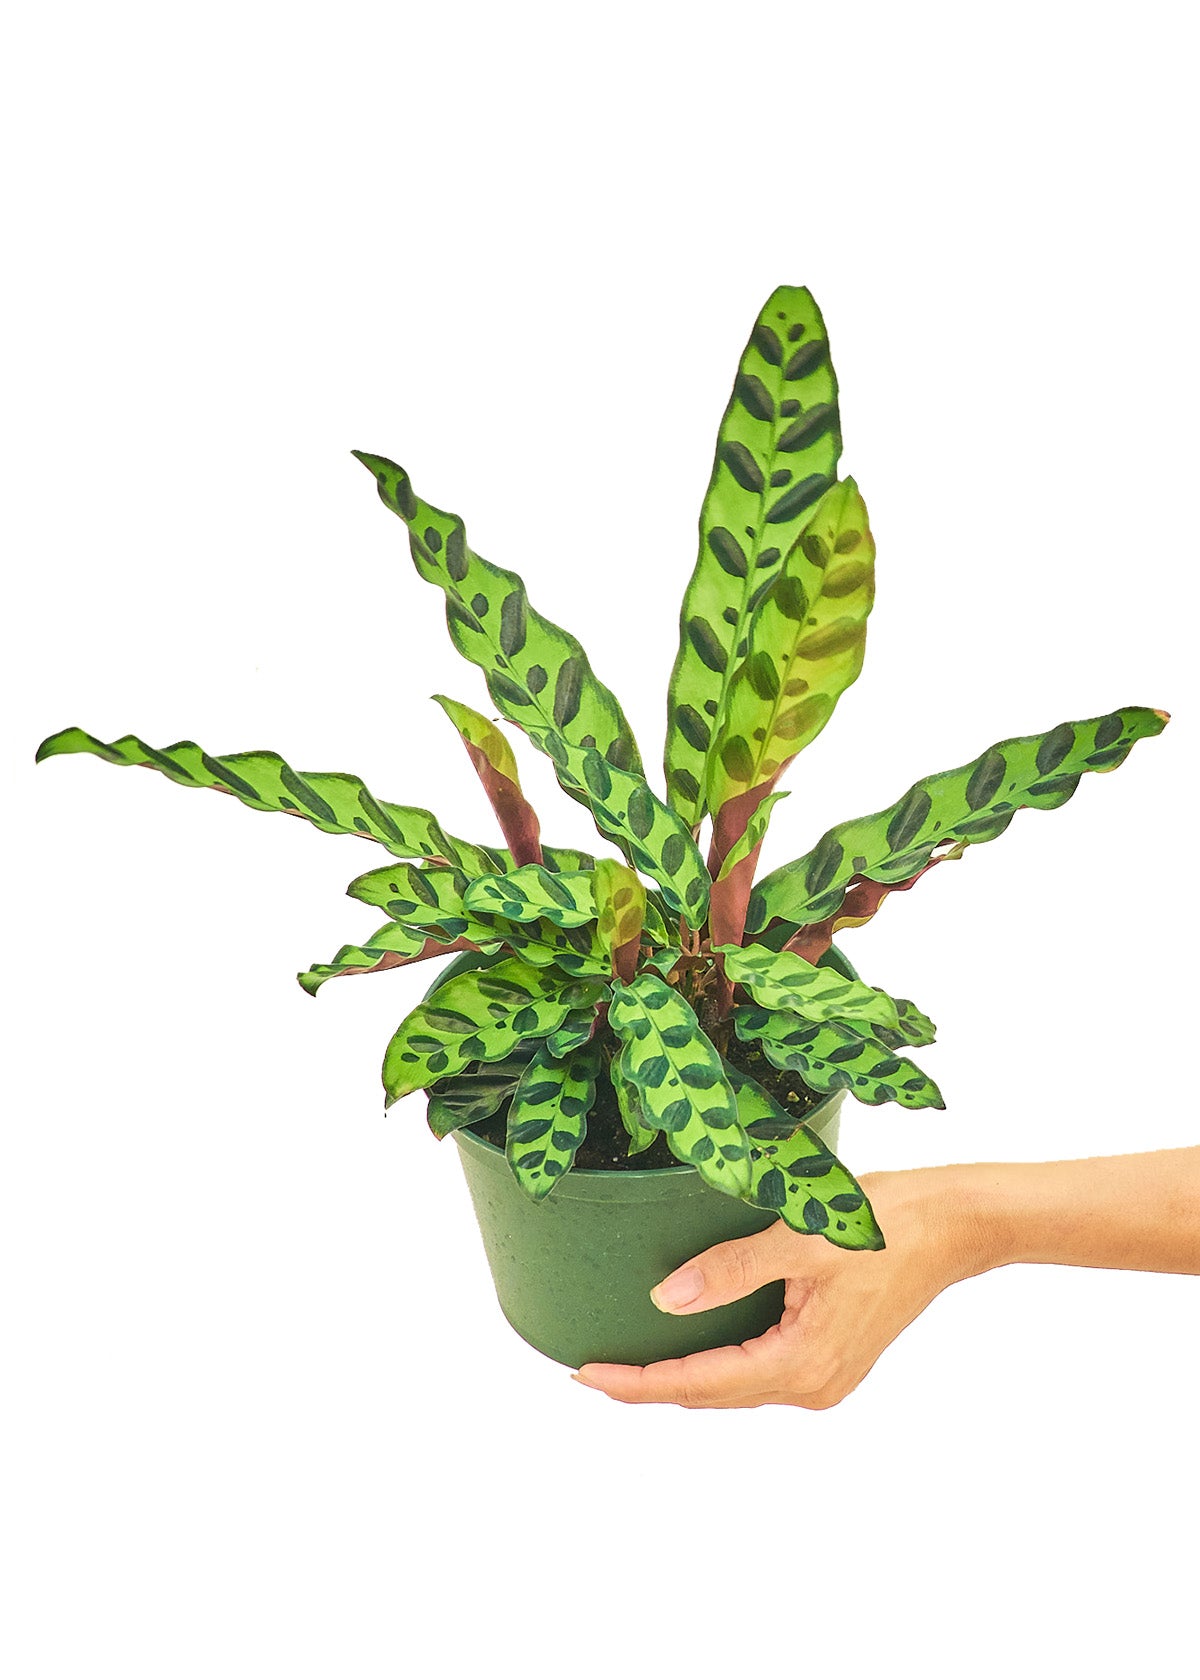 Medium size Calathea Rattlesnake plant in a growers pot with a white background with a hand holding the pot showing the top view